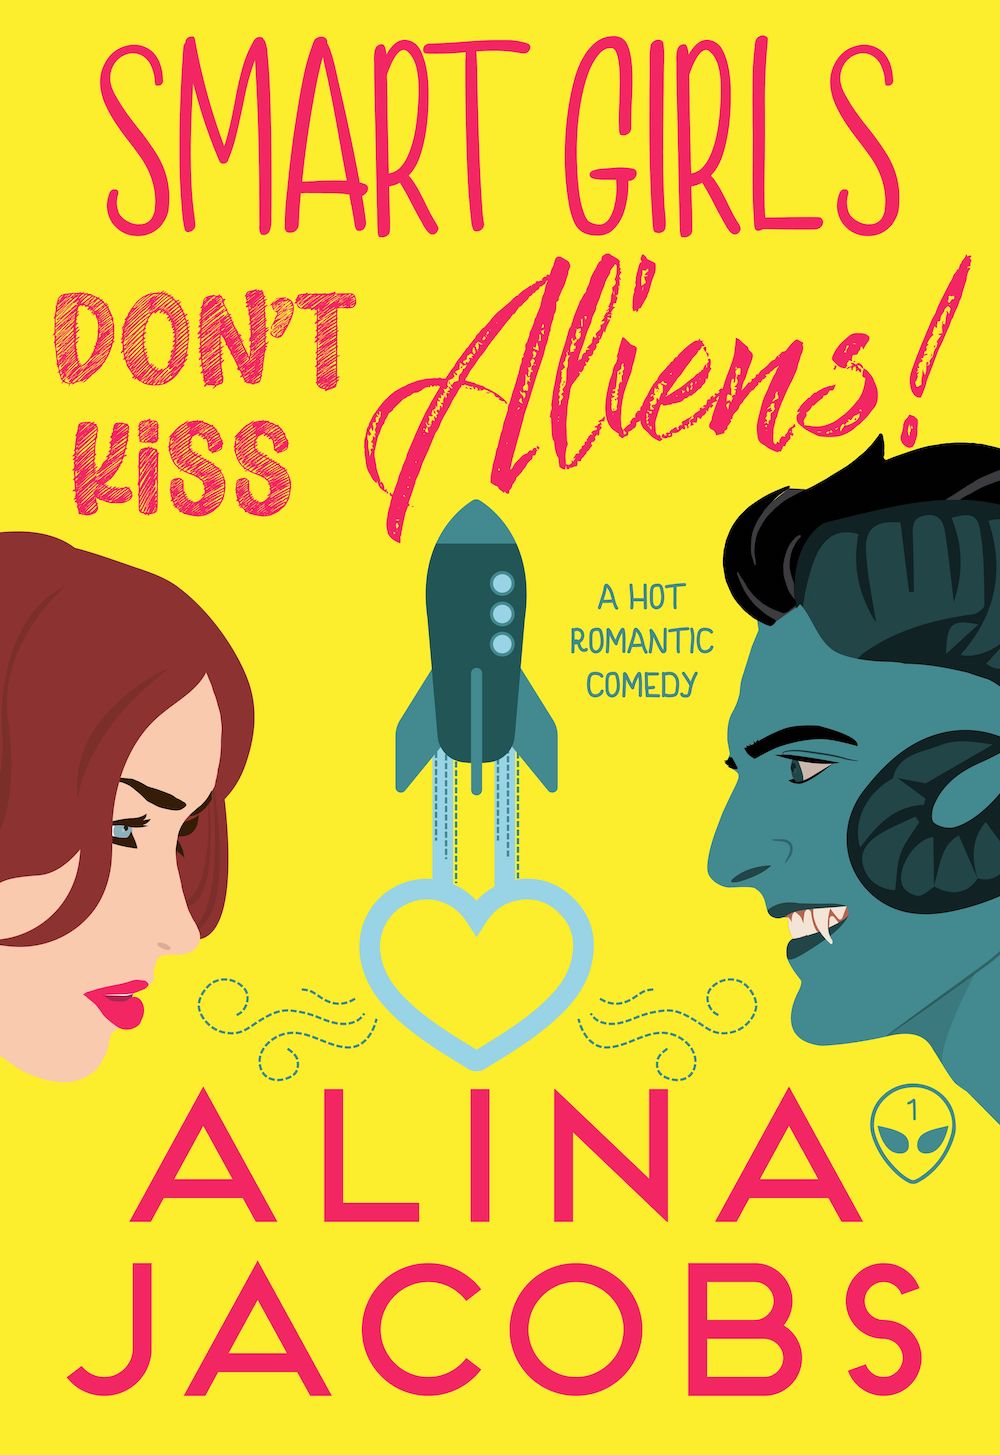 Smart Girls Don’t Kiss Aliens by Alina Jacobs